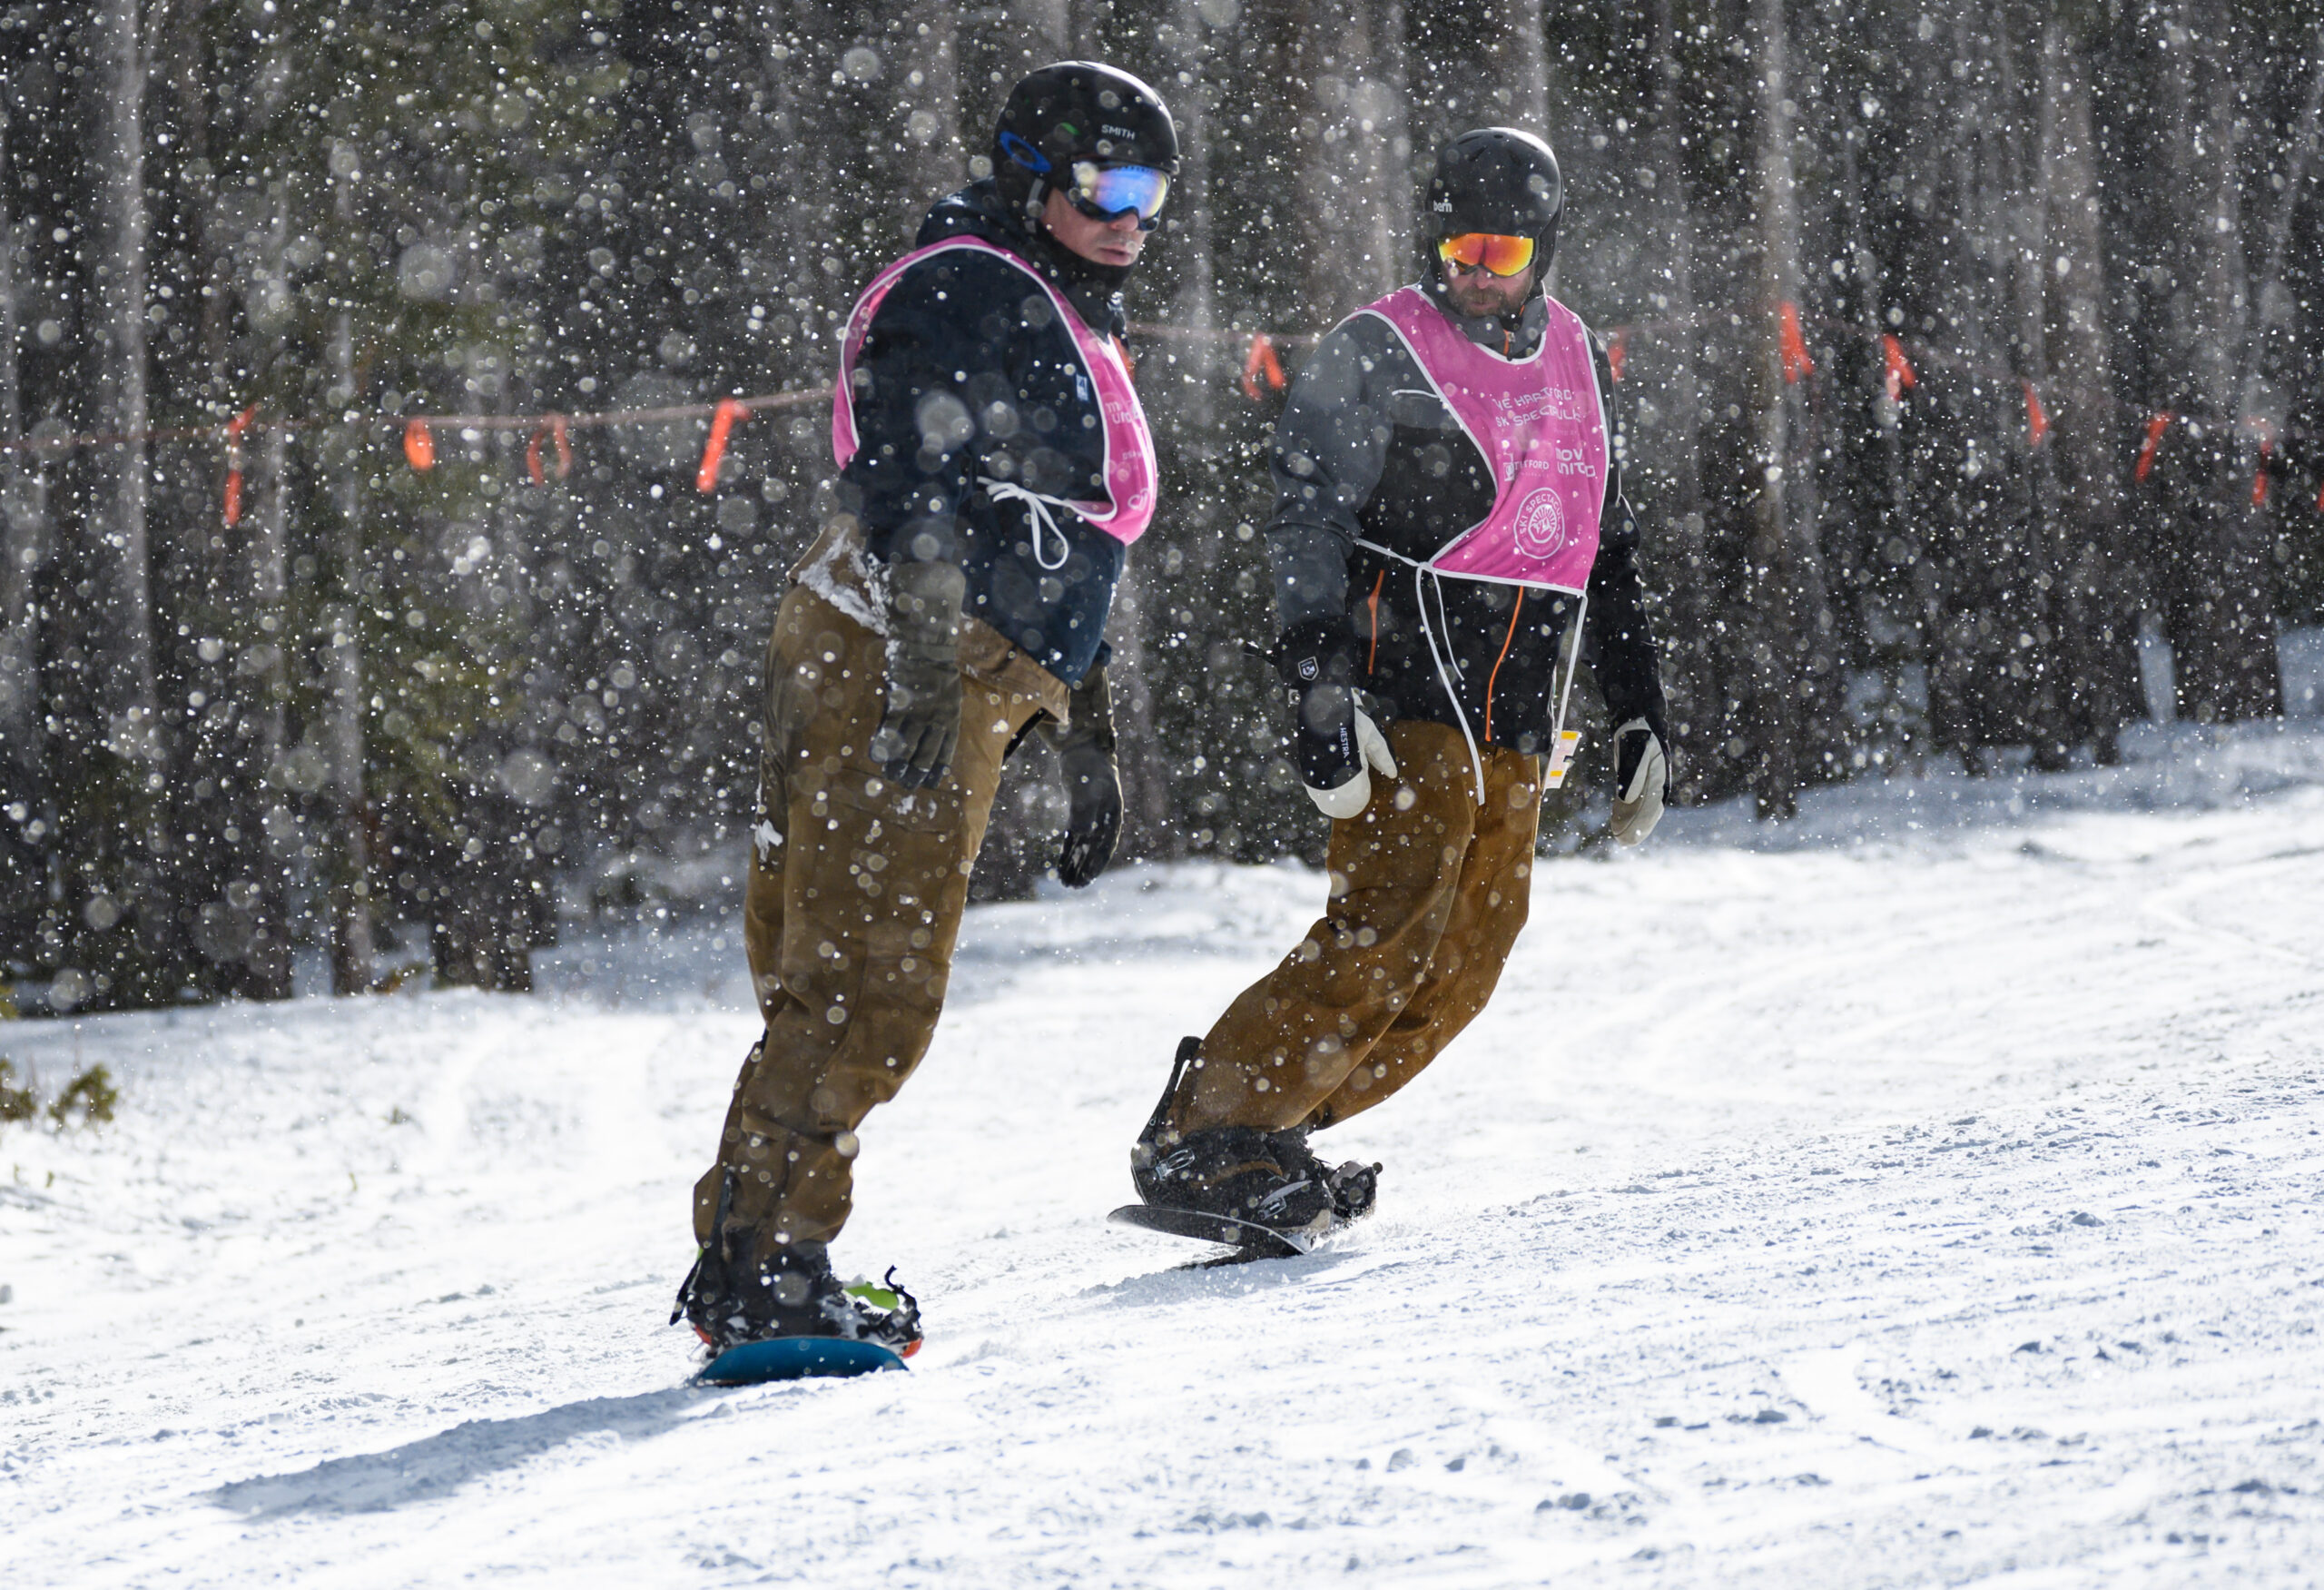 Two people snowboarding with heavy snow coming down